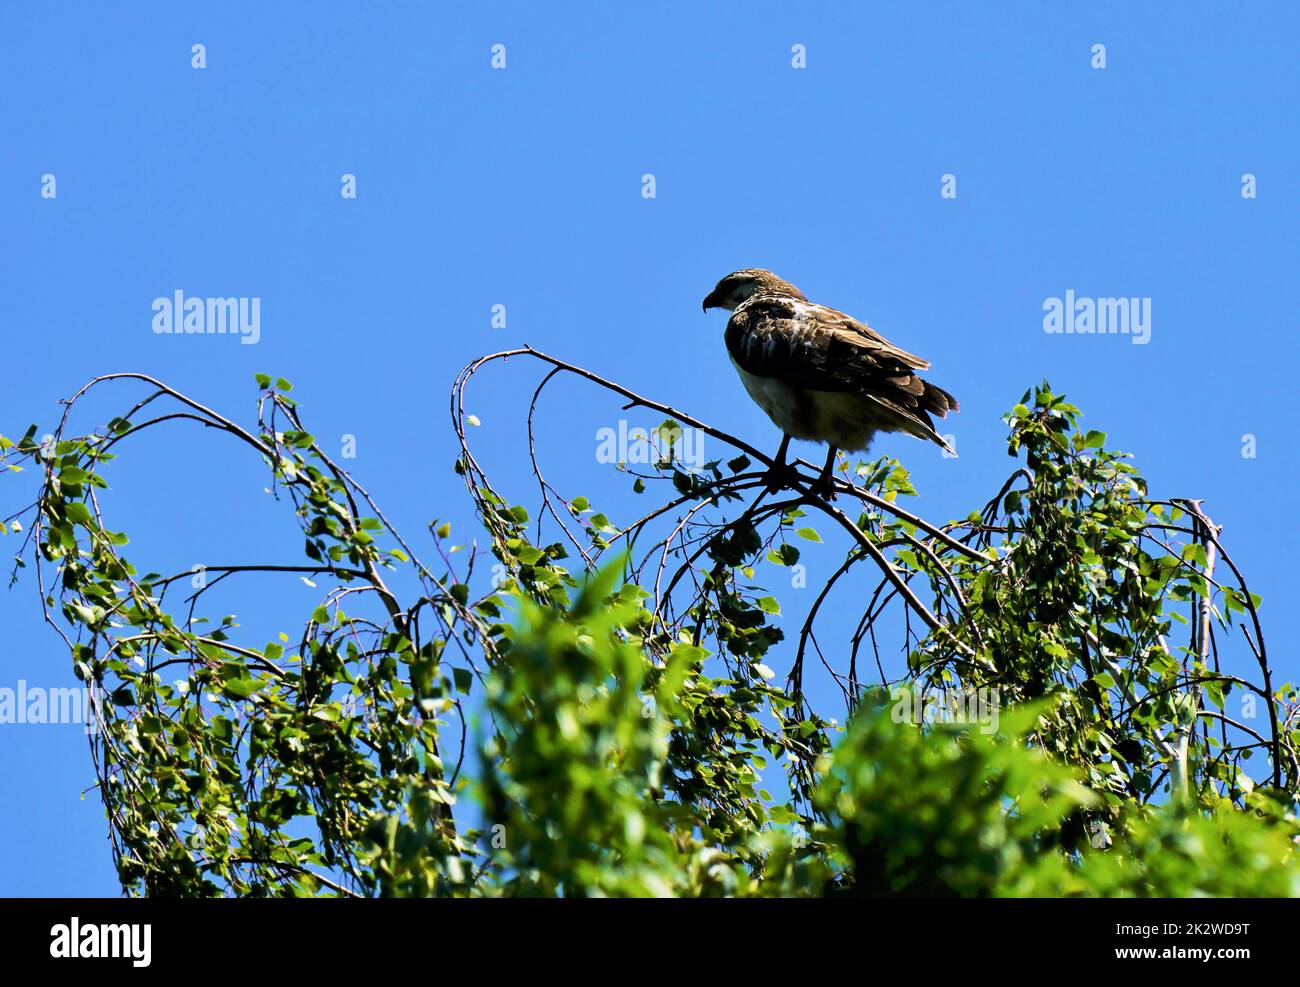 Eurasian buzzard in nature sitting on a branch Stock Photo